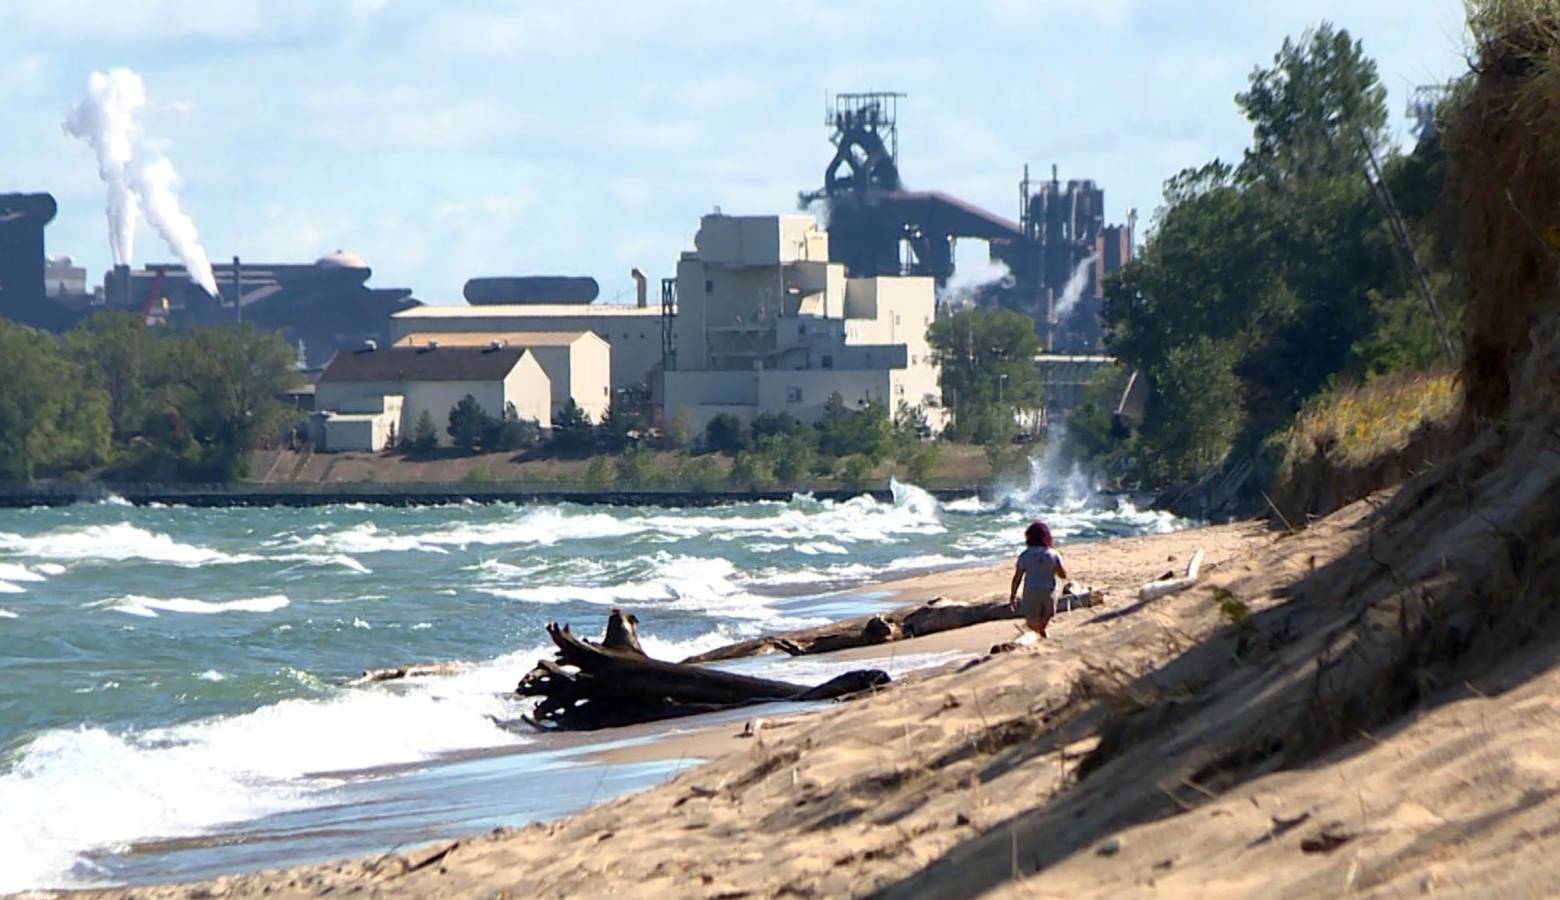 The view of U.S. Steel from Indiana Dunes National Park. (Tyler Lake/WTIU)